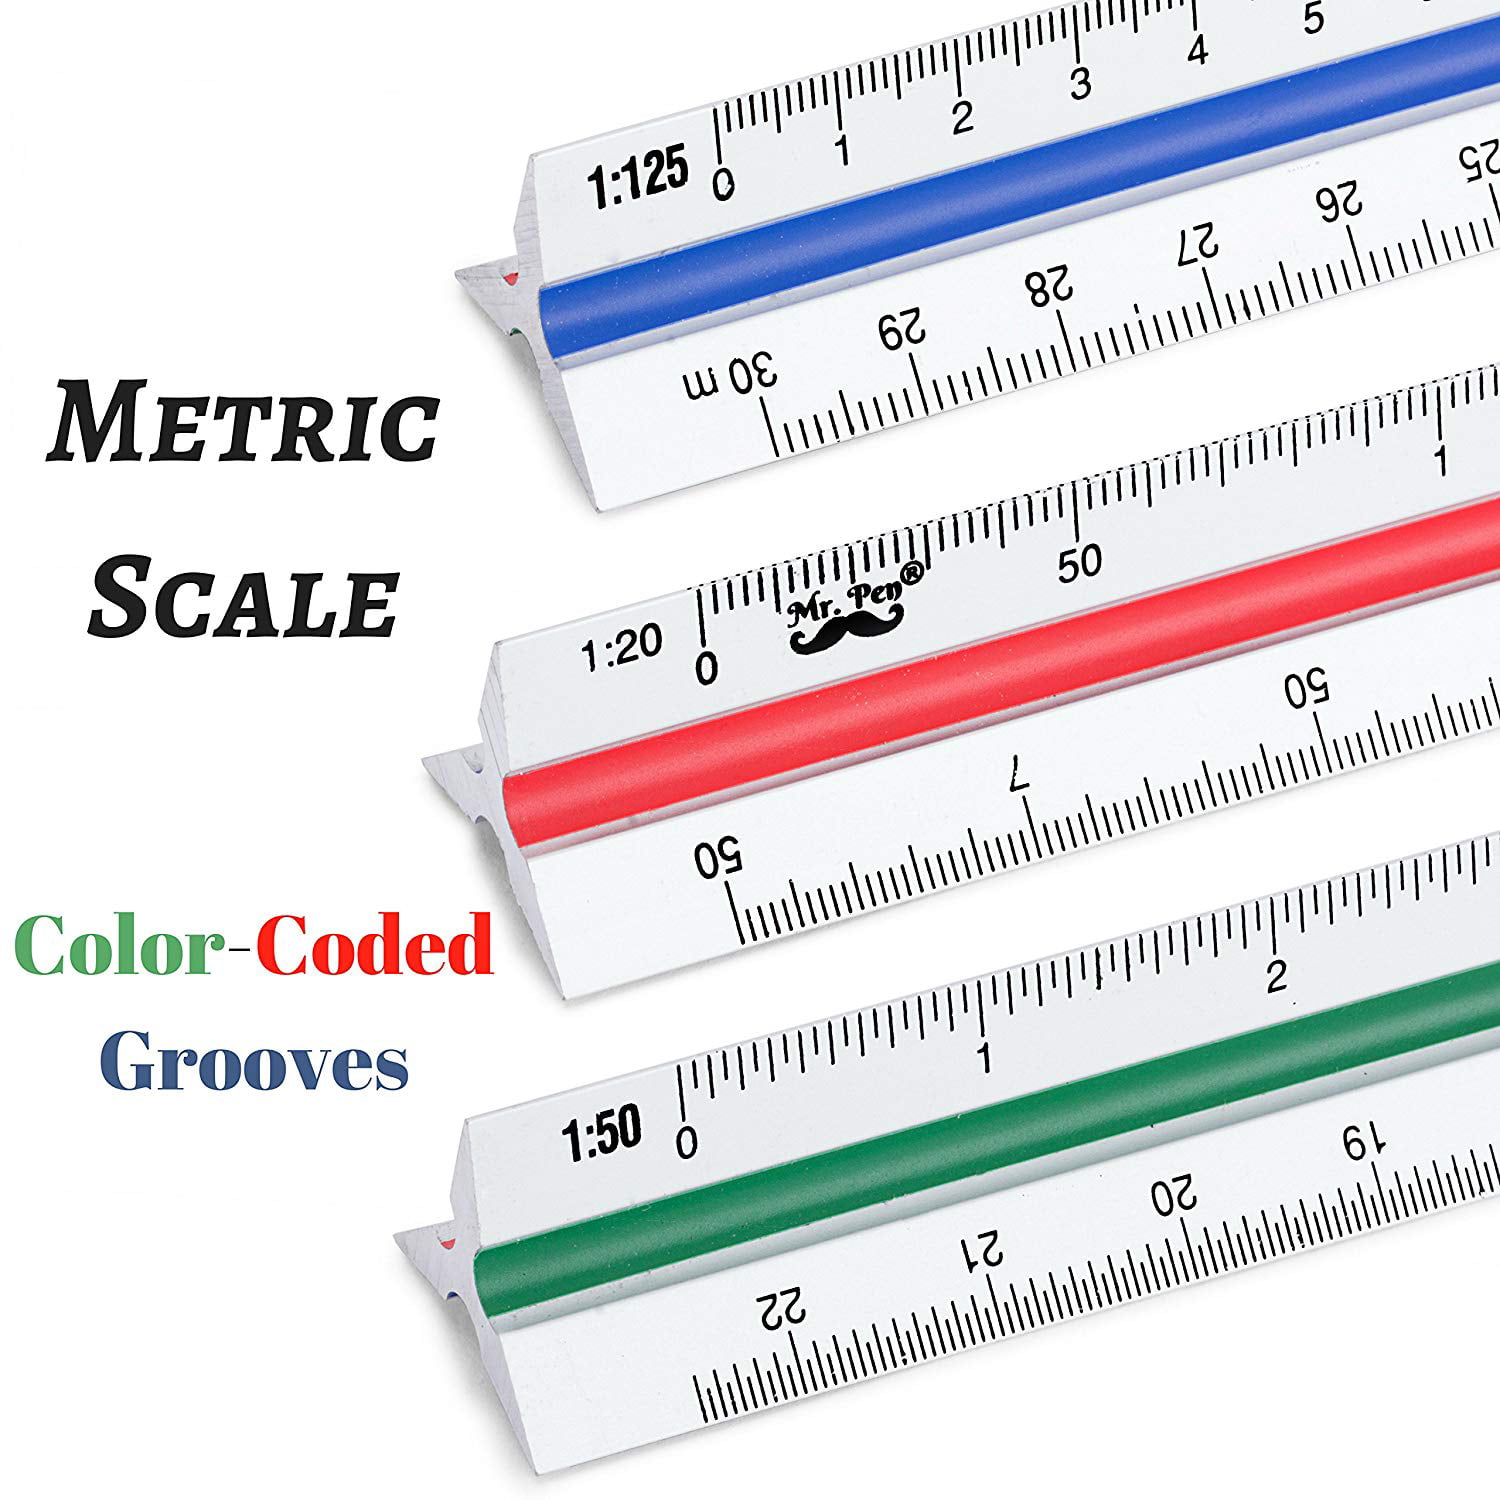 Architectural Scale Ruler Students 1:125 Standard 12 Inch for ...